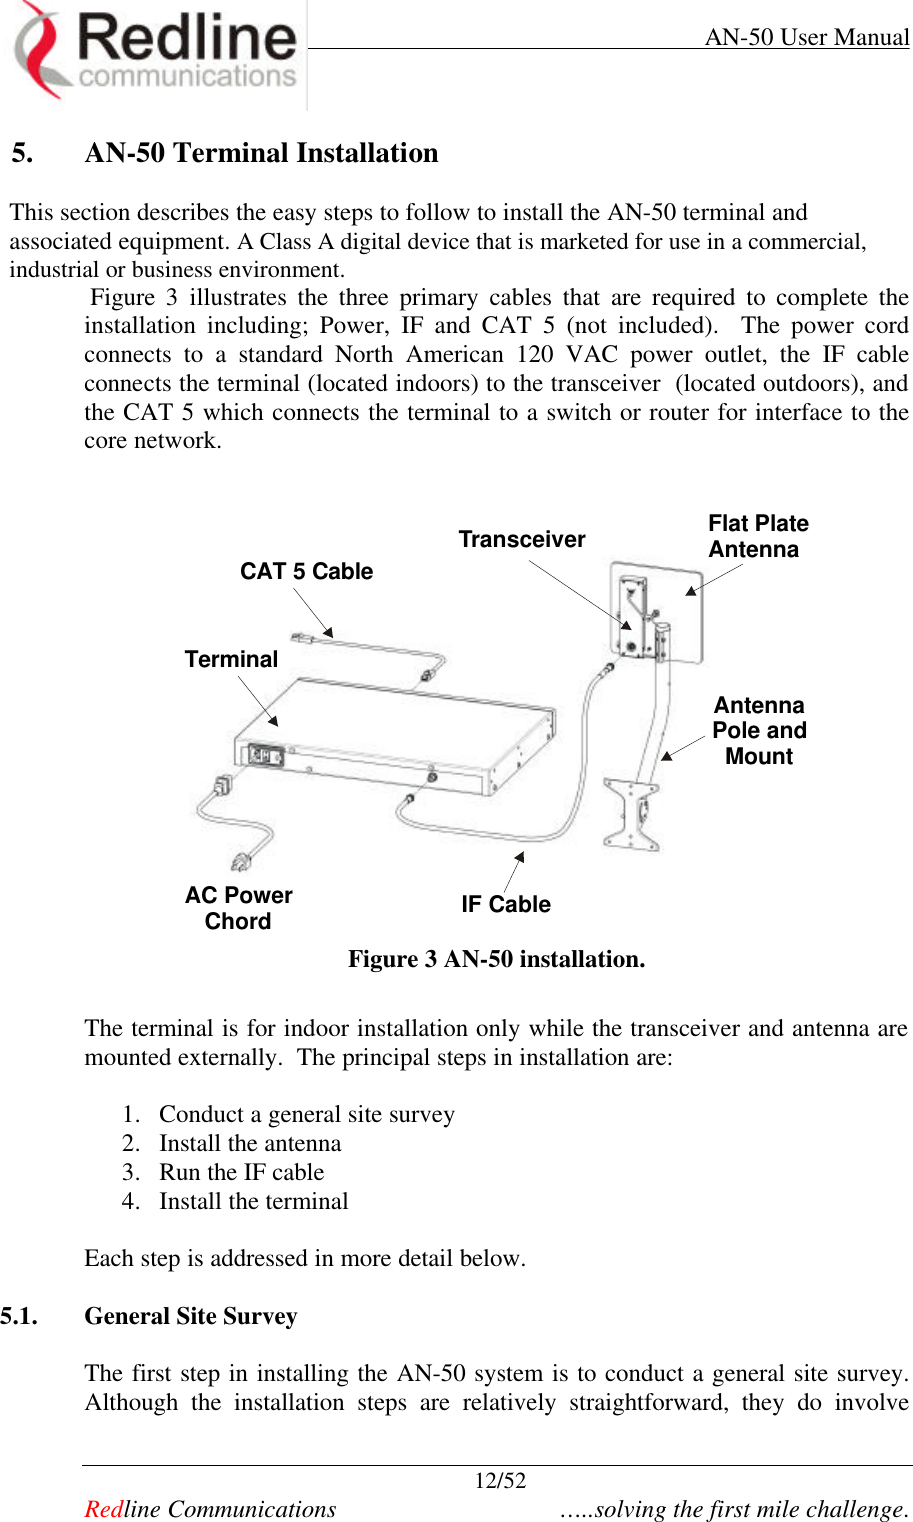     AN-50 User Manual  12/52   Redline Communications    …..solving the first mile challenge. 5. AN-50 Terminal Installation  This section describes the easy steps to follow to install the AN-50 terminal and associated equipment. A Class A digital device that is marketed for use in a commercial, industrial or business environment.  Figure  3 illustrates the three primary cables that are required to complete the installation including; Power, IF and CAT 5 (not included).  The power cord connects to a standard North American 120 VAC power outlet, the IF cable connects the terminal (located indoors) to the transceiver  (located outdoors), and the CAT 5 which connects the terminal to a switch or router for interface to the core network.   TerminalCAT 5 CableAC PowerChordIF CableTransceiverAntennaPole and MountFlat PlateAntenna Figure 3 AN-50 installation.  The terminal is for indoor installation only while the transceiver and antenna are mounted externally.  The principal steps in installation are:  1. Conduct a general site survey 2. Install the antenna 3. Run the IF cable 4. Install the terminal  Each step is addressed in more detail below.  5.1. General Site Survey  The first step in installing the AN-50 system is to conduct a general site survey.  Although the installation steps are relatively straightforward, they do involve 